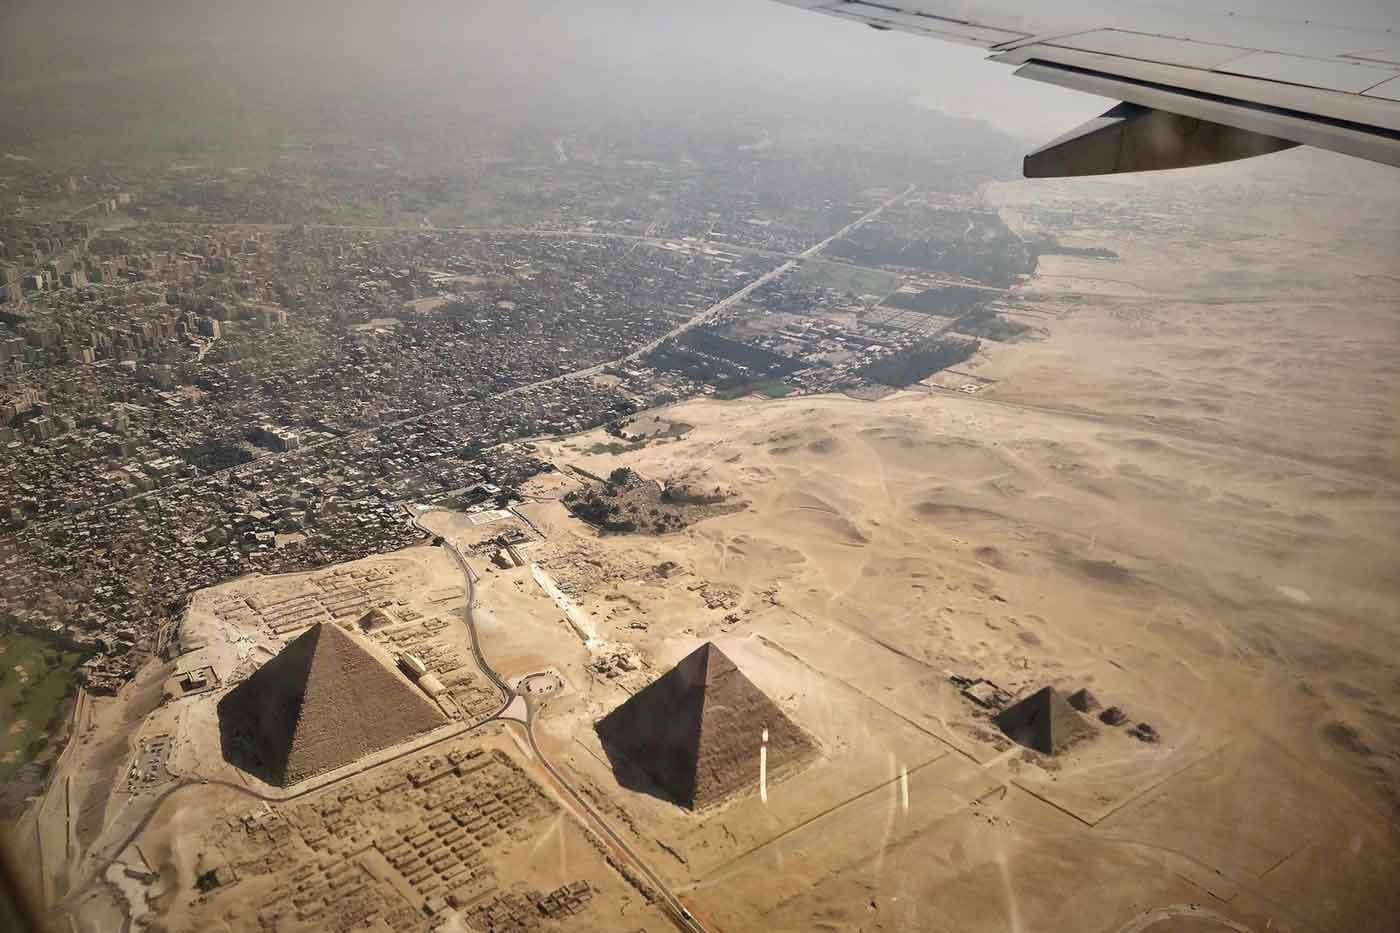 View from plane flying over pyramids and city